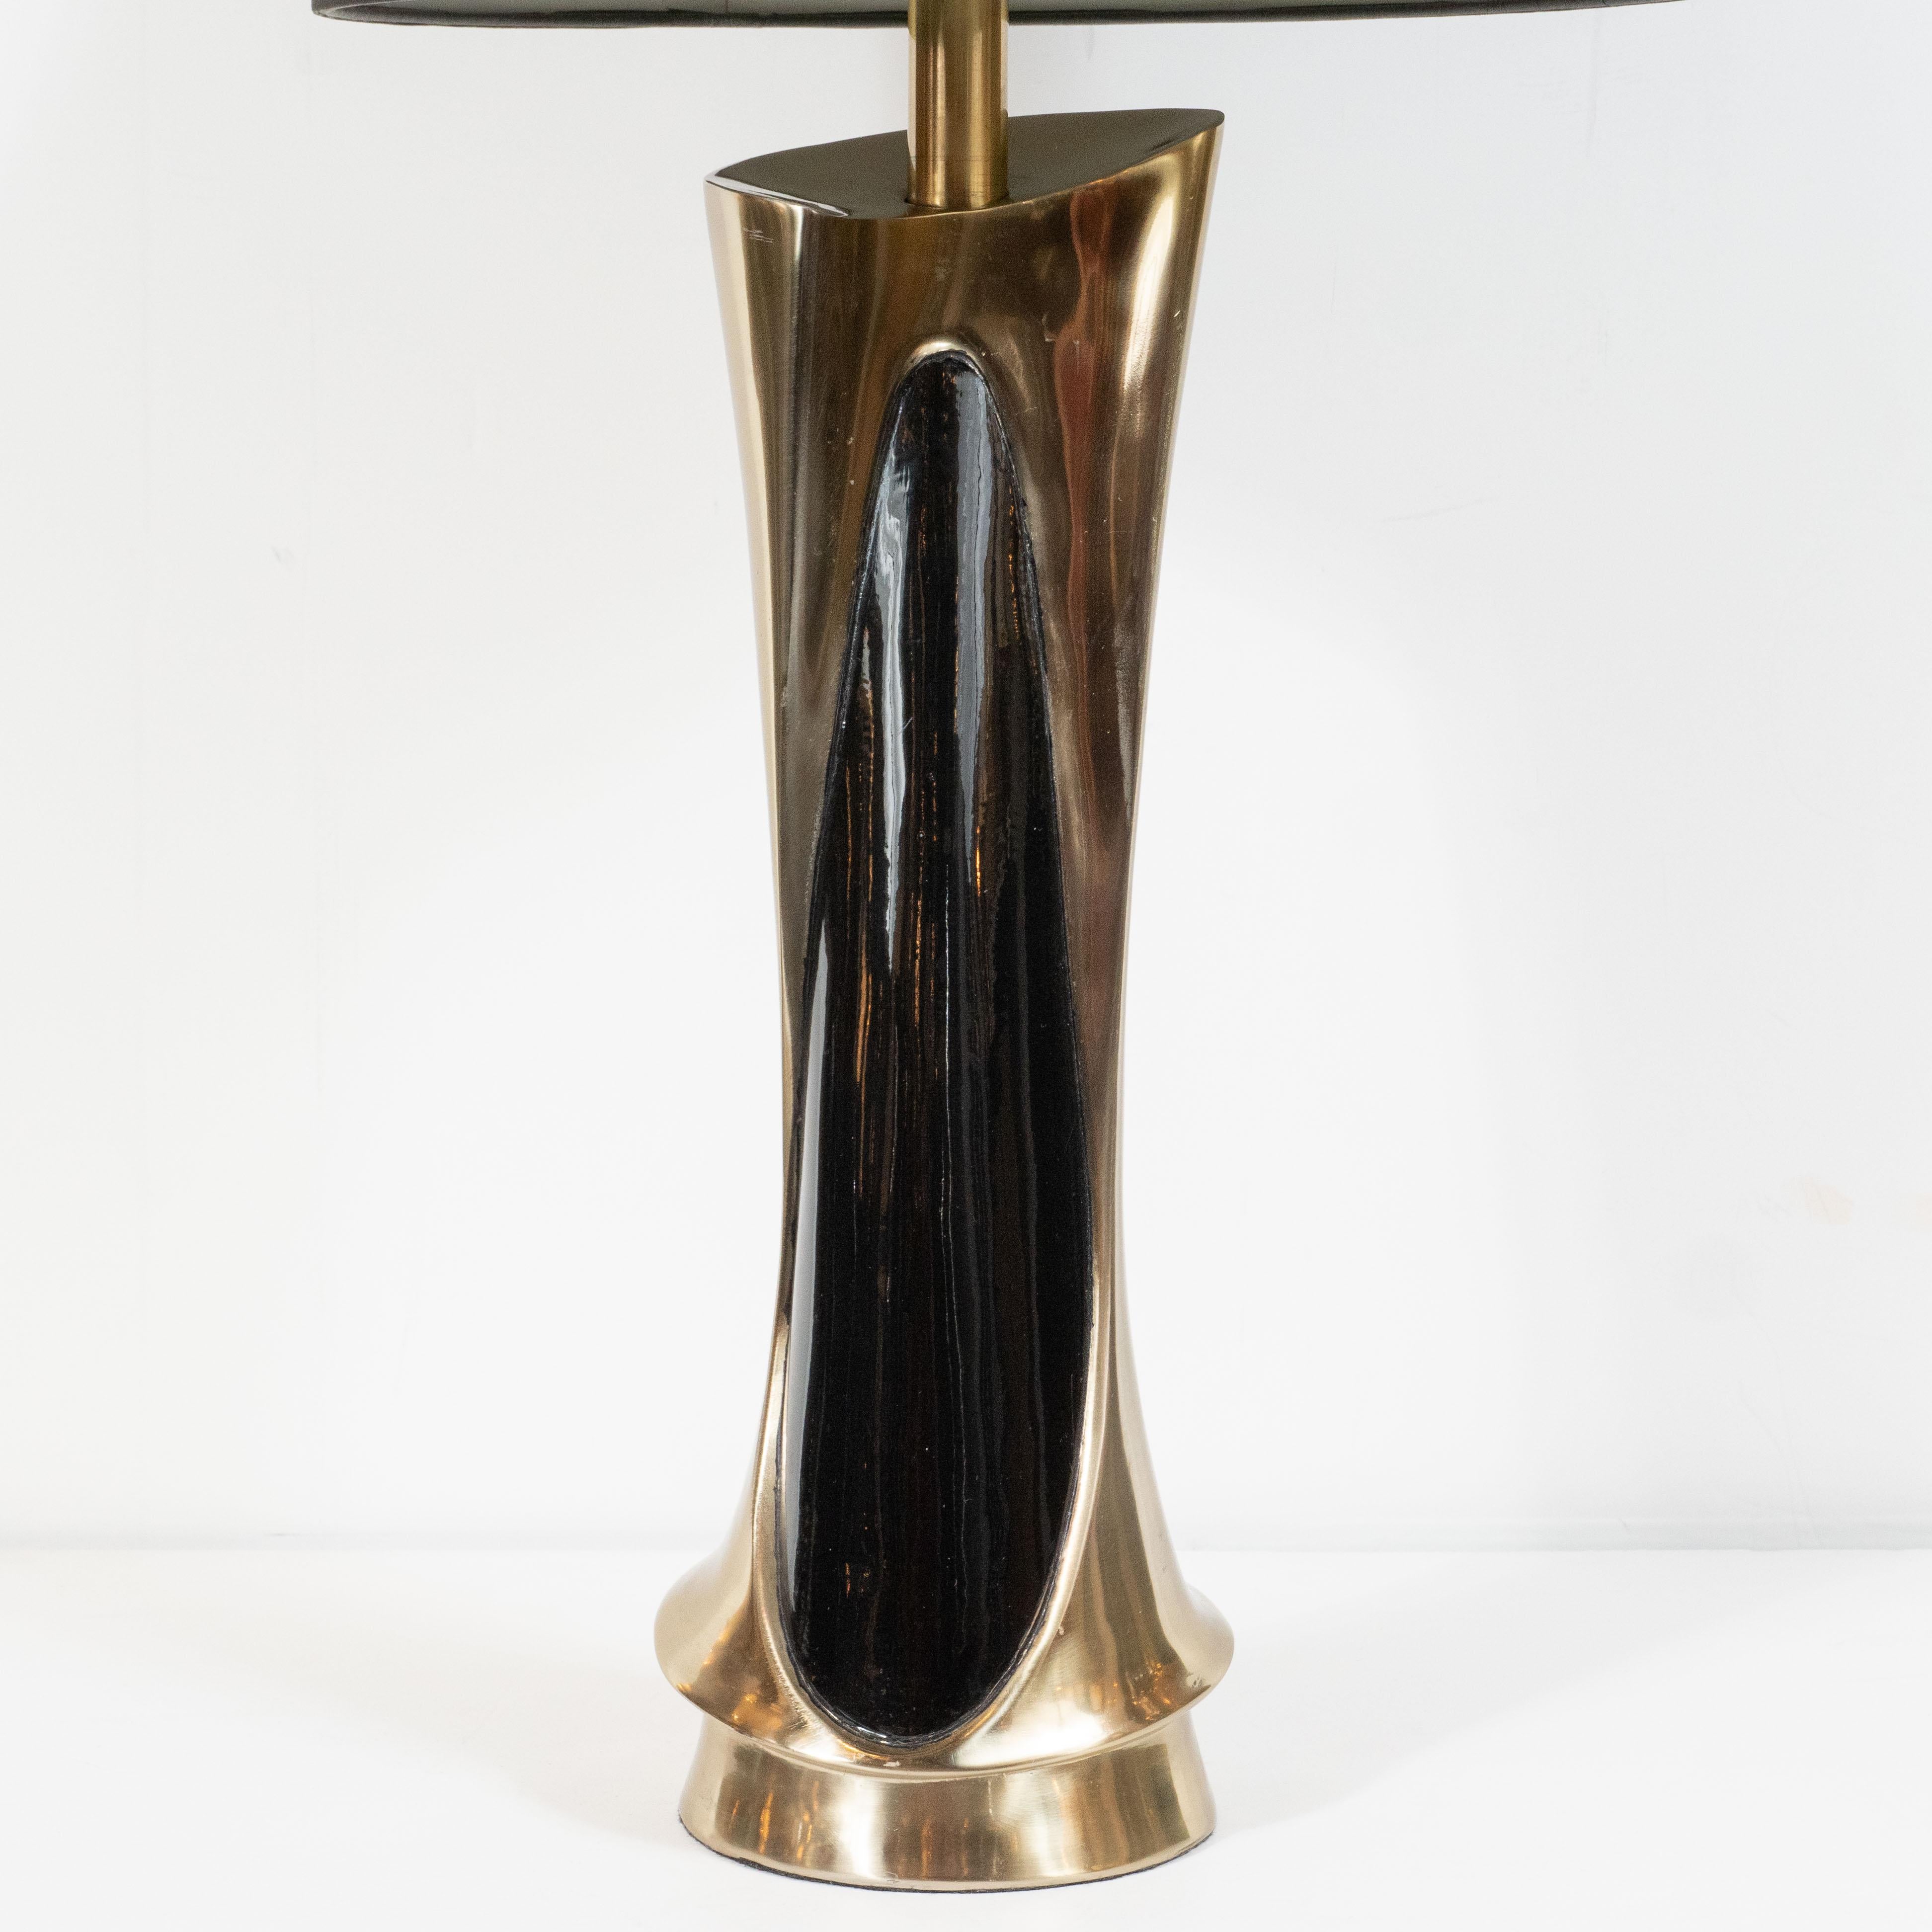 This refined pair of brutalist table lamps were realized in the United States by the Laurel Lamp Company, circa 1970. They feature circular bases and amorphic bodies with brass backs and elliptical ebonized walnut inlays, which offers a beautiful